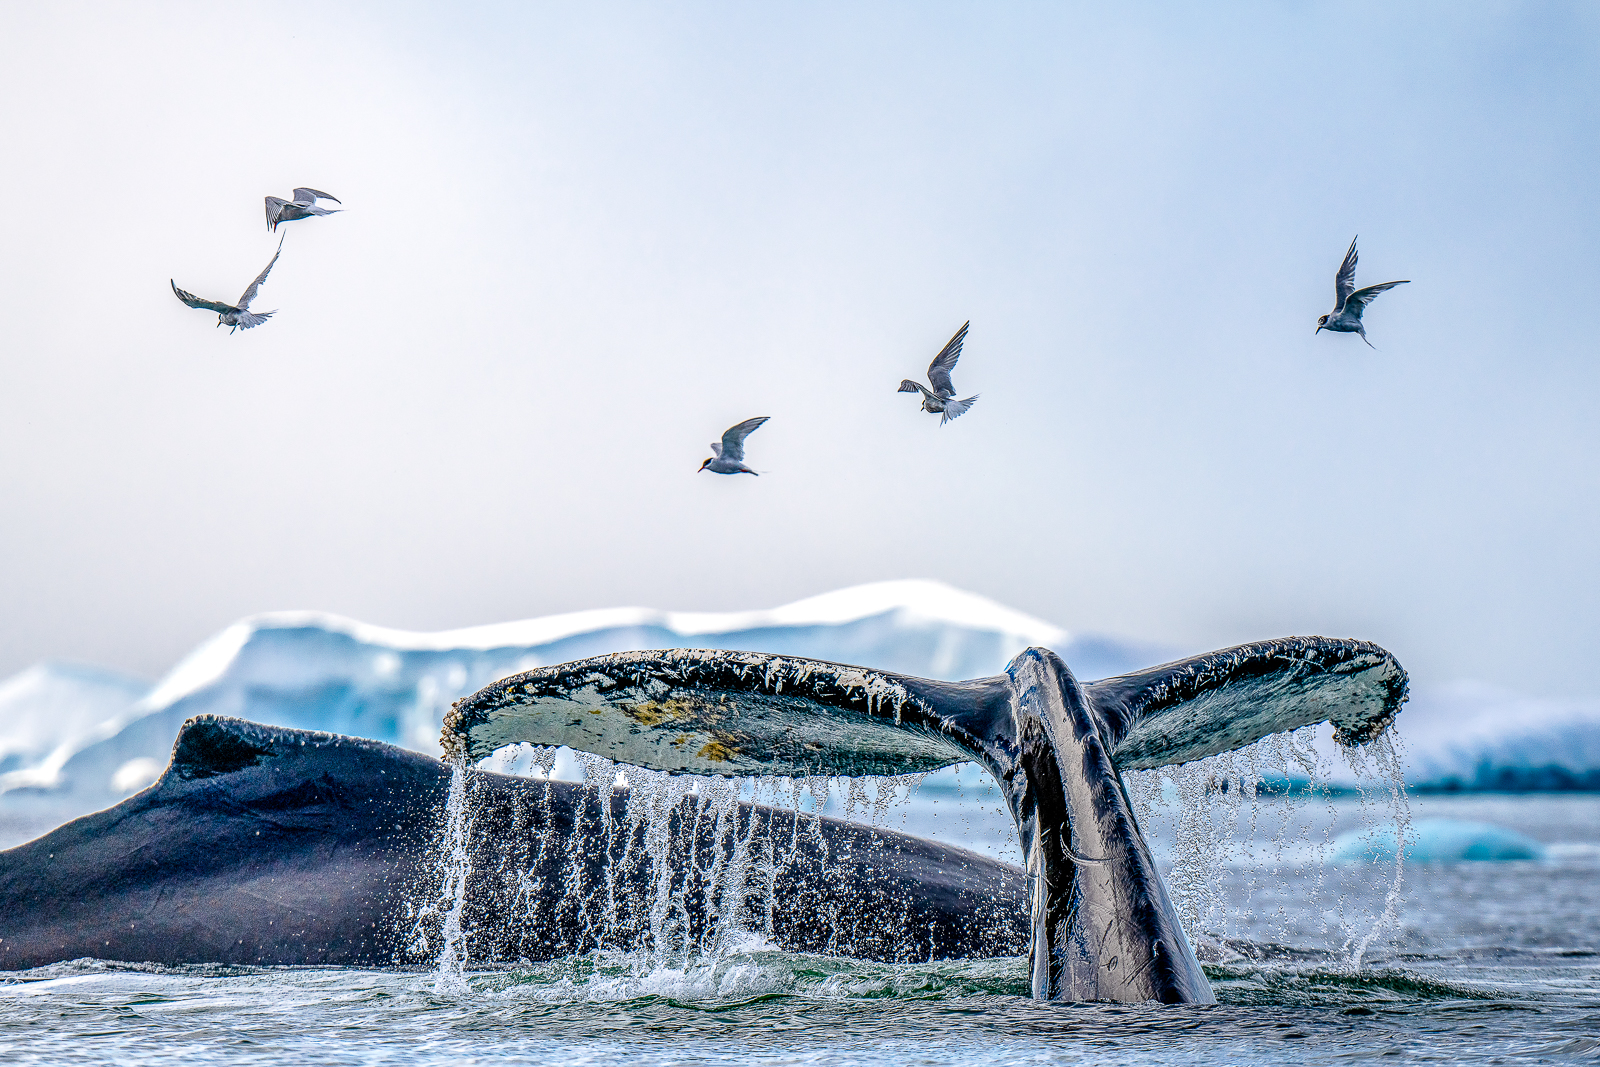 A whale breaching the waters of the South Shetland Islands viewed from the Magellan Explorer